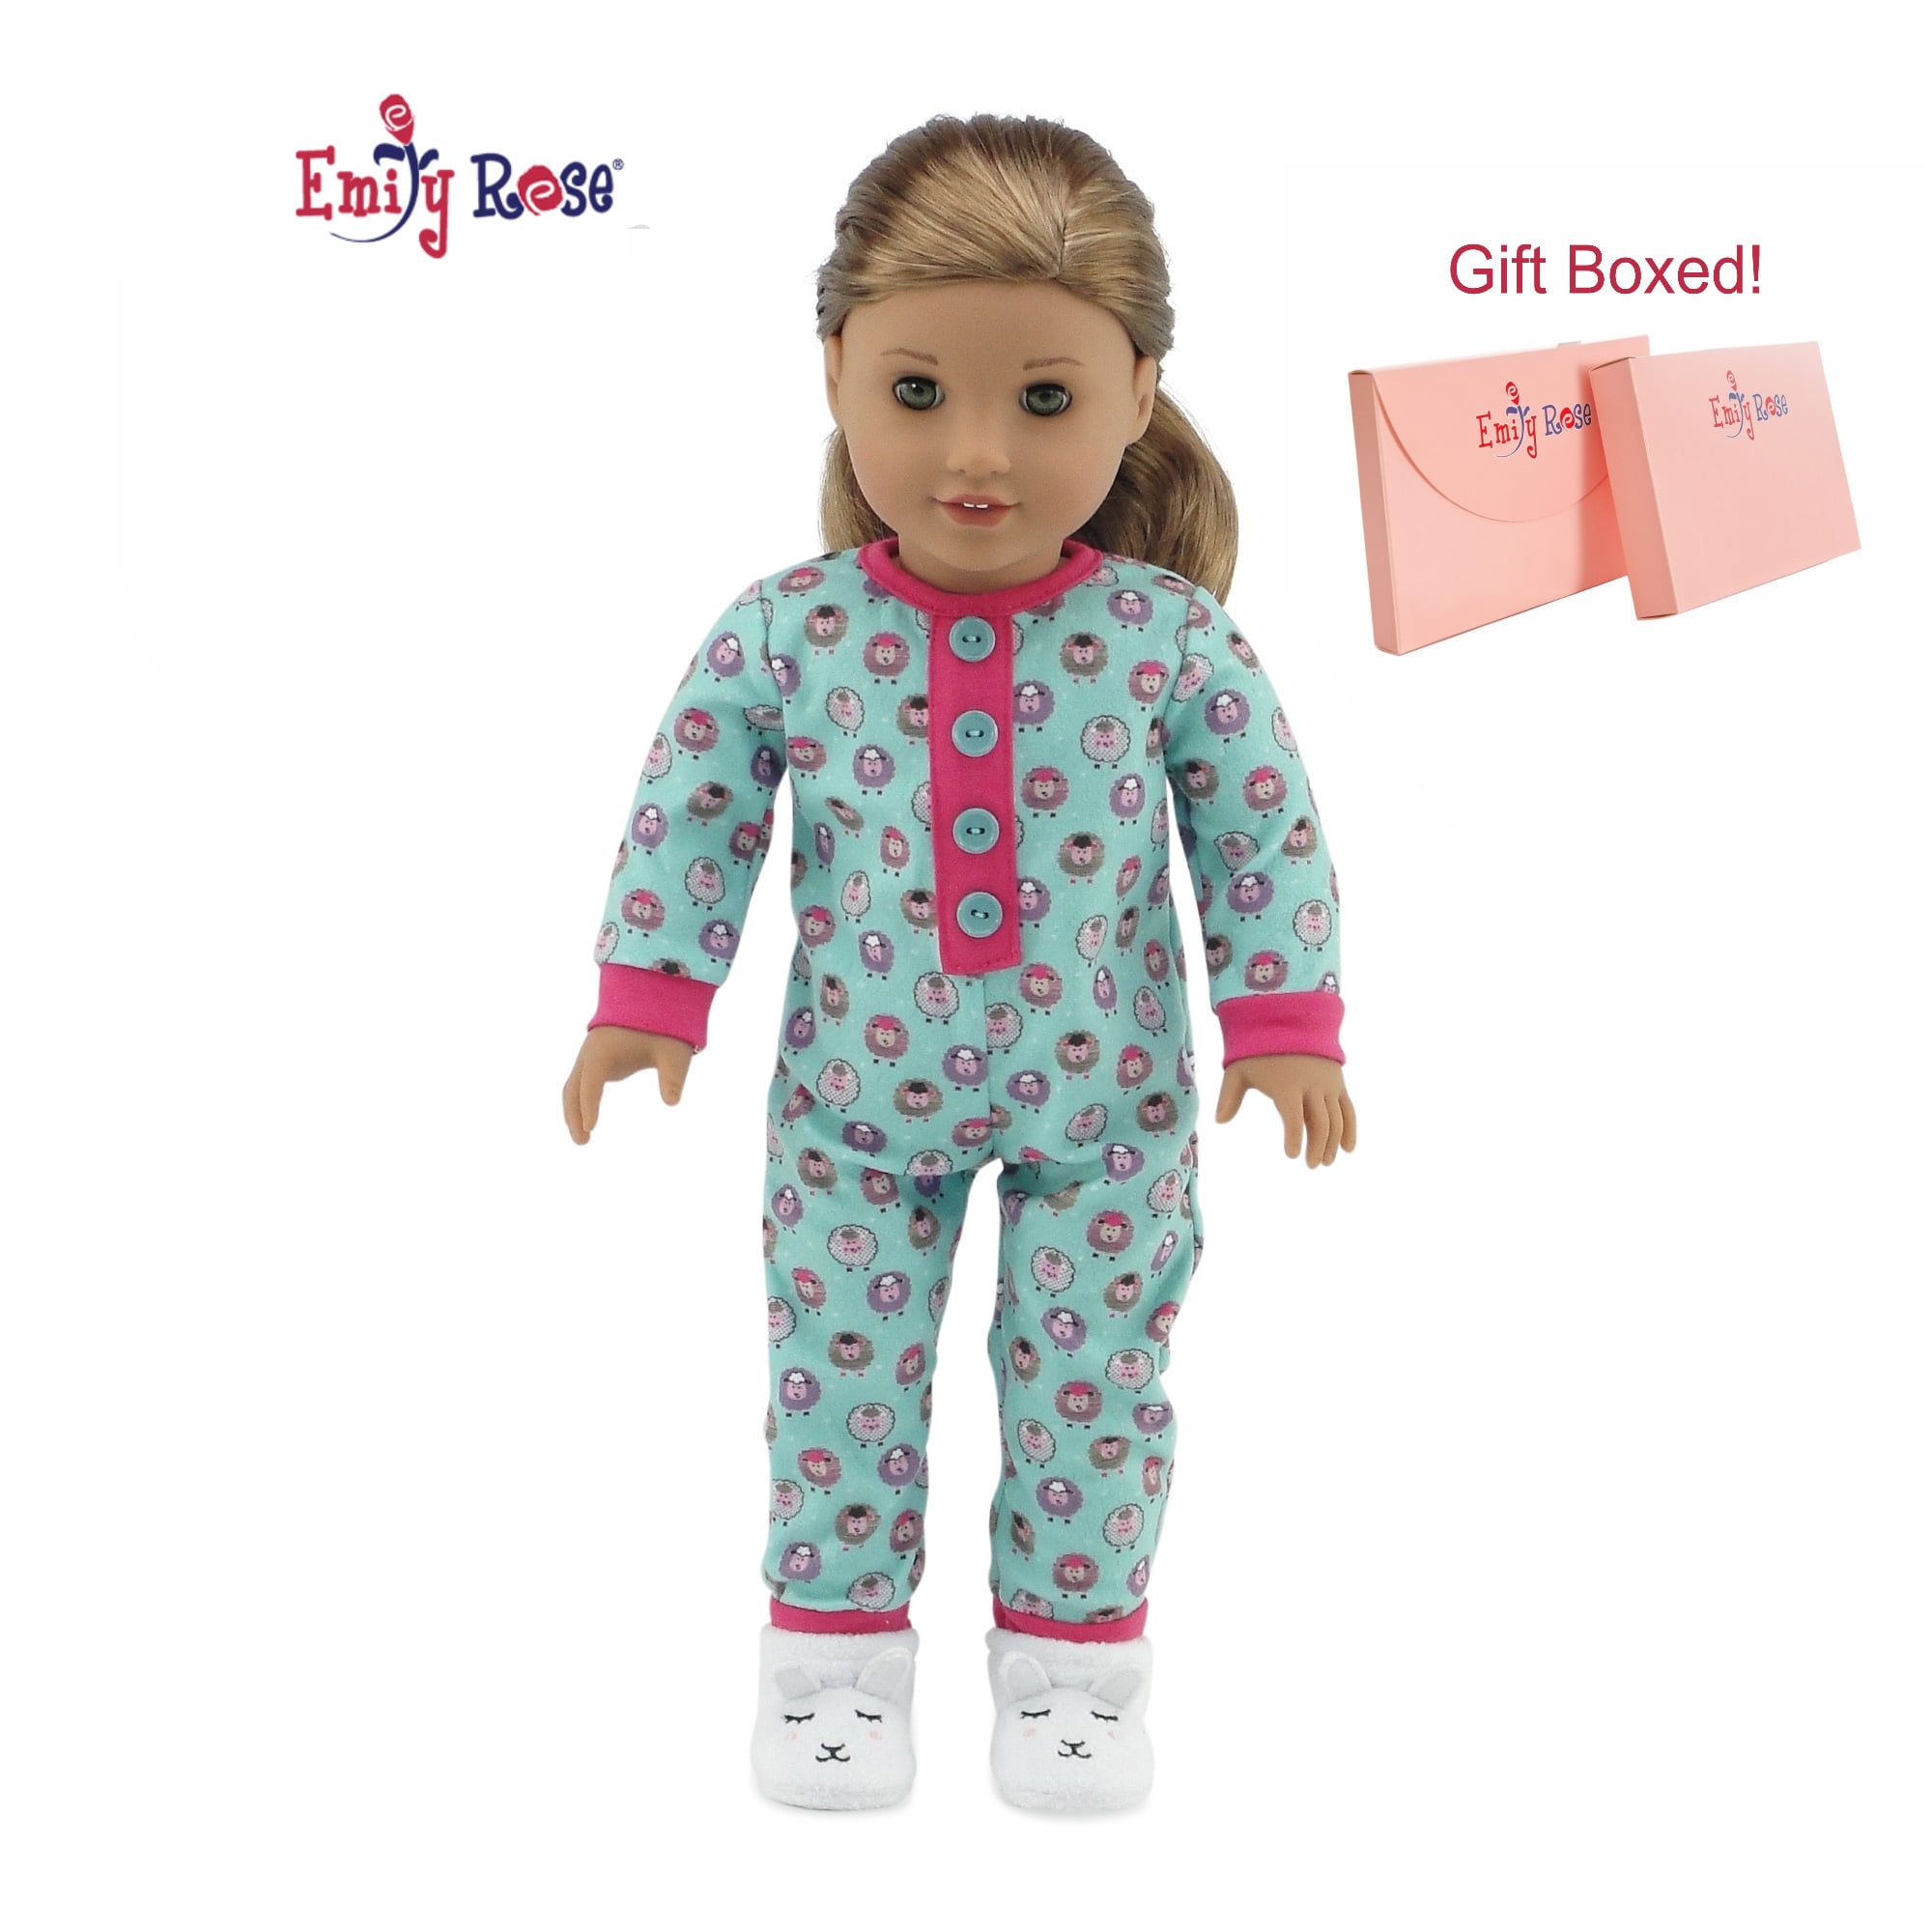 Handmade Accessories18" Inch American Girl Doll Clothes Plush hooded pajamas